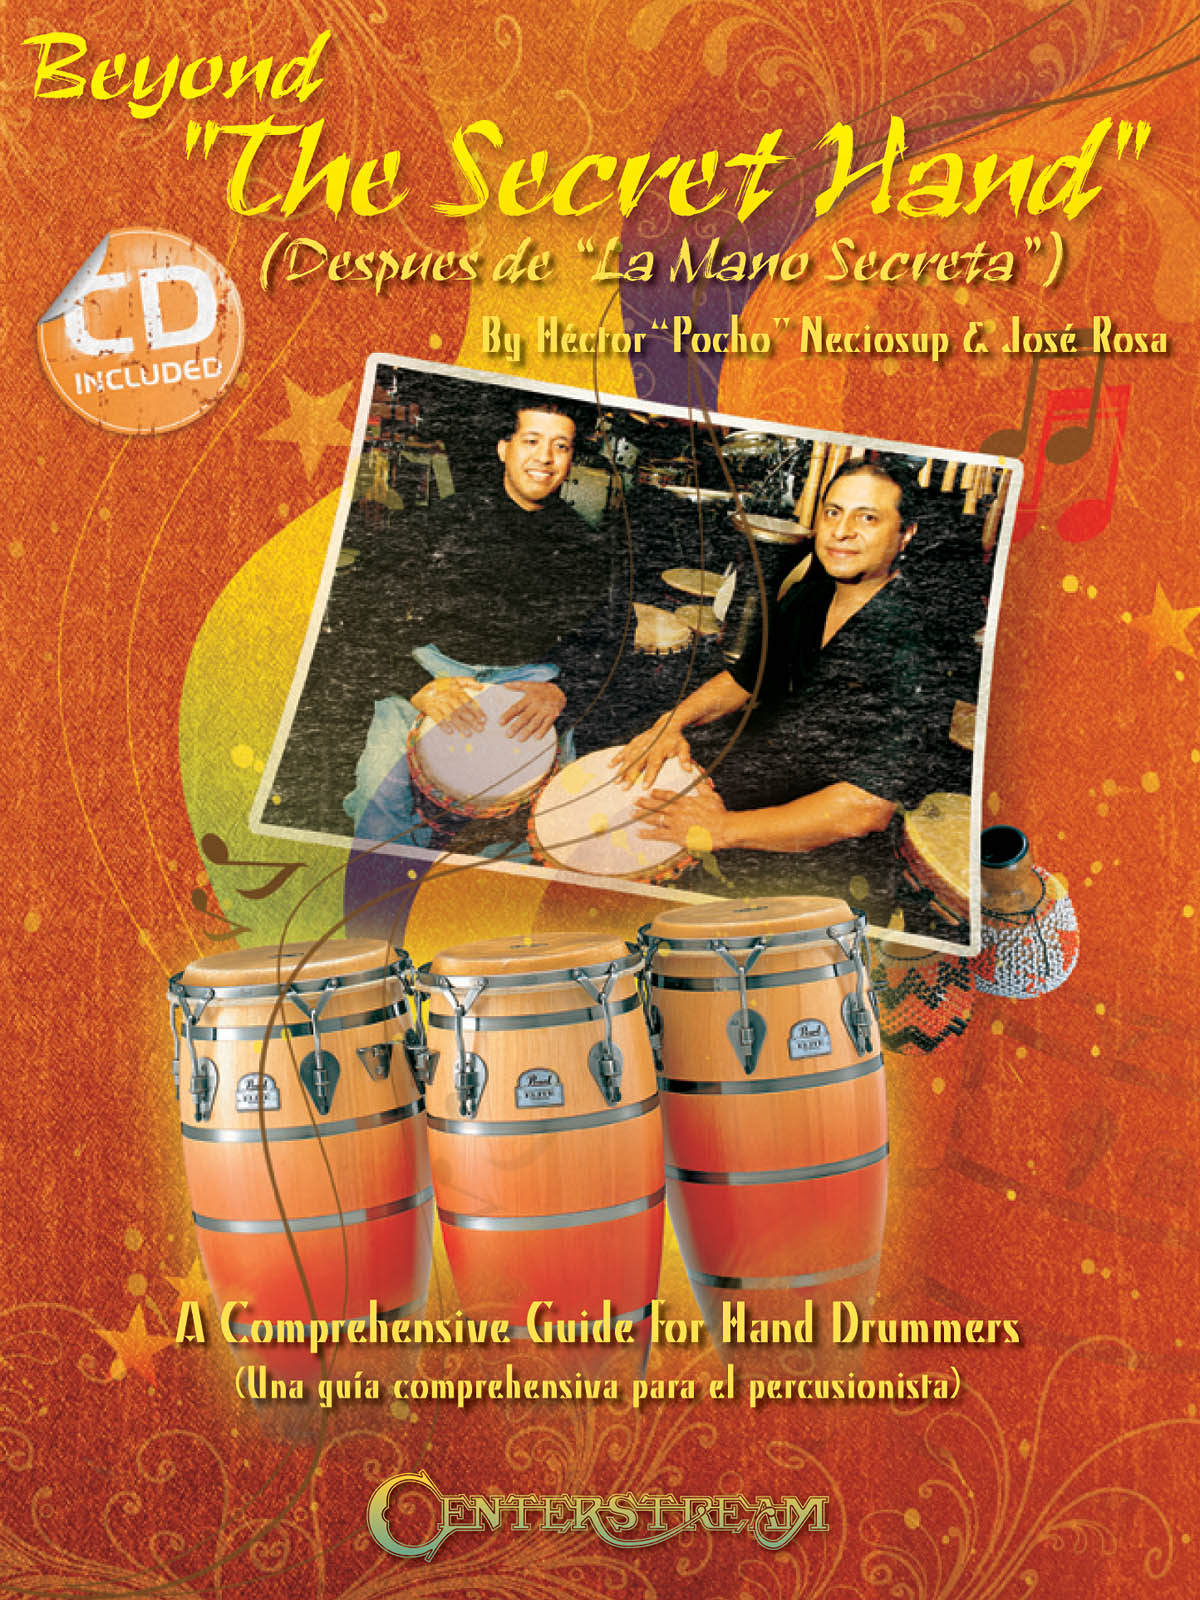 Hctor Poncho Neciosup Jos Rosa: Beyond The Secret Hand: Other Percussion: